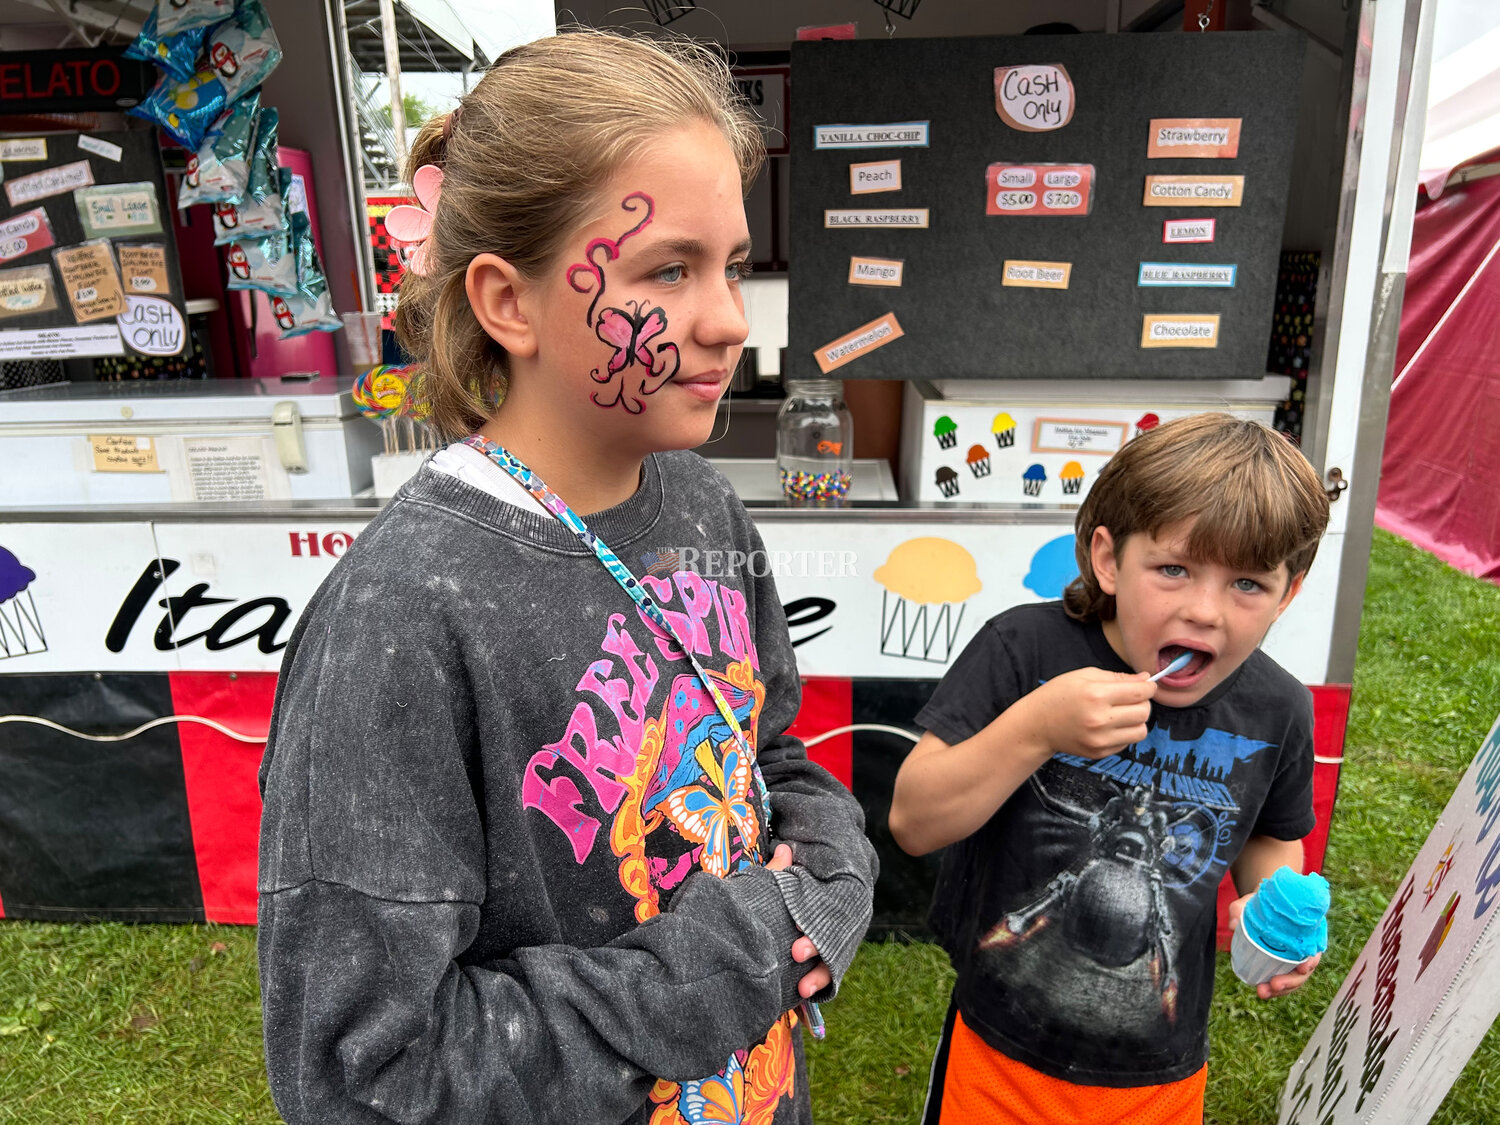 Eleanor White shows off her face paint, done by artists in the art exhibit building, while her brother Peter enjoys an Italian ice on Tuesday, Aug. 15.